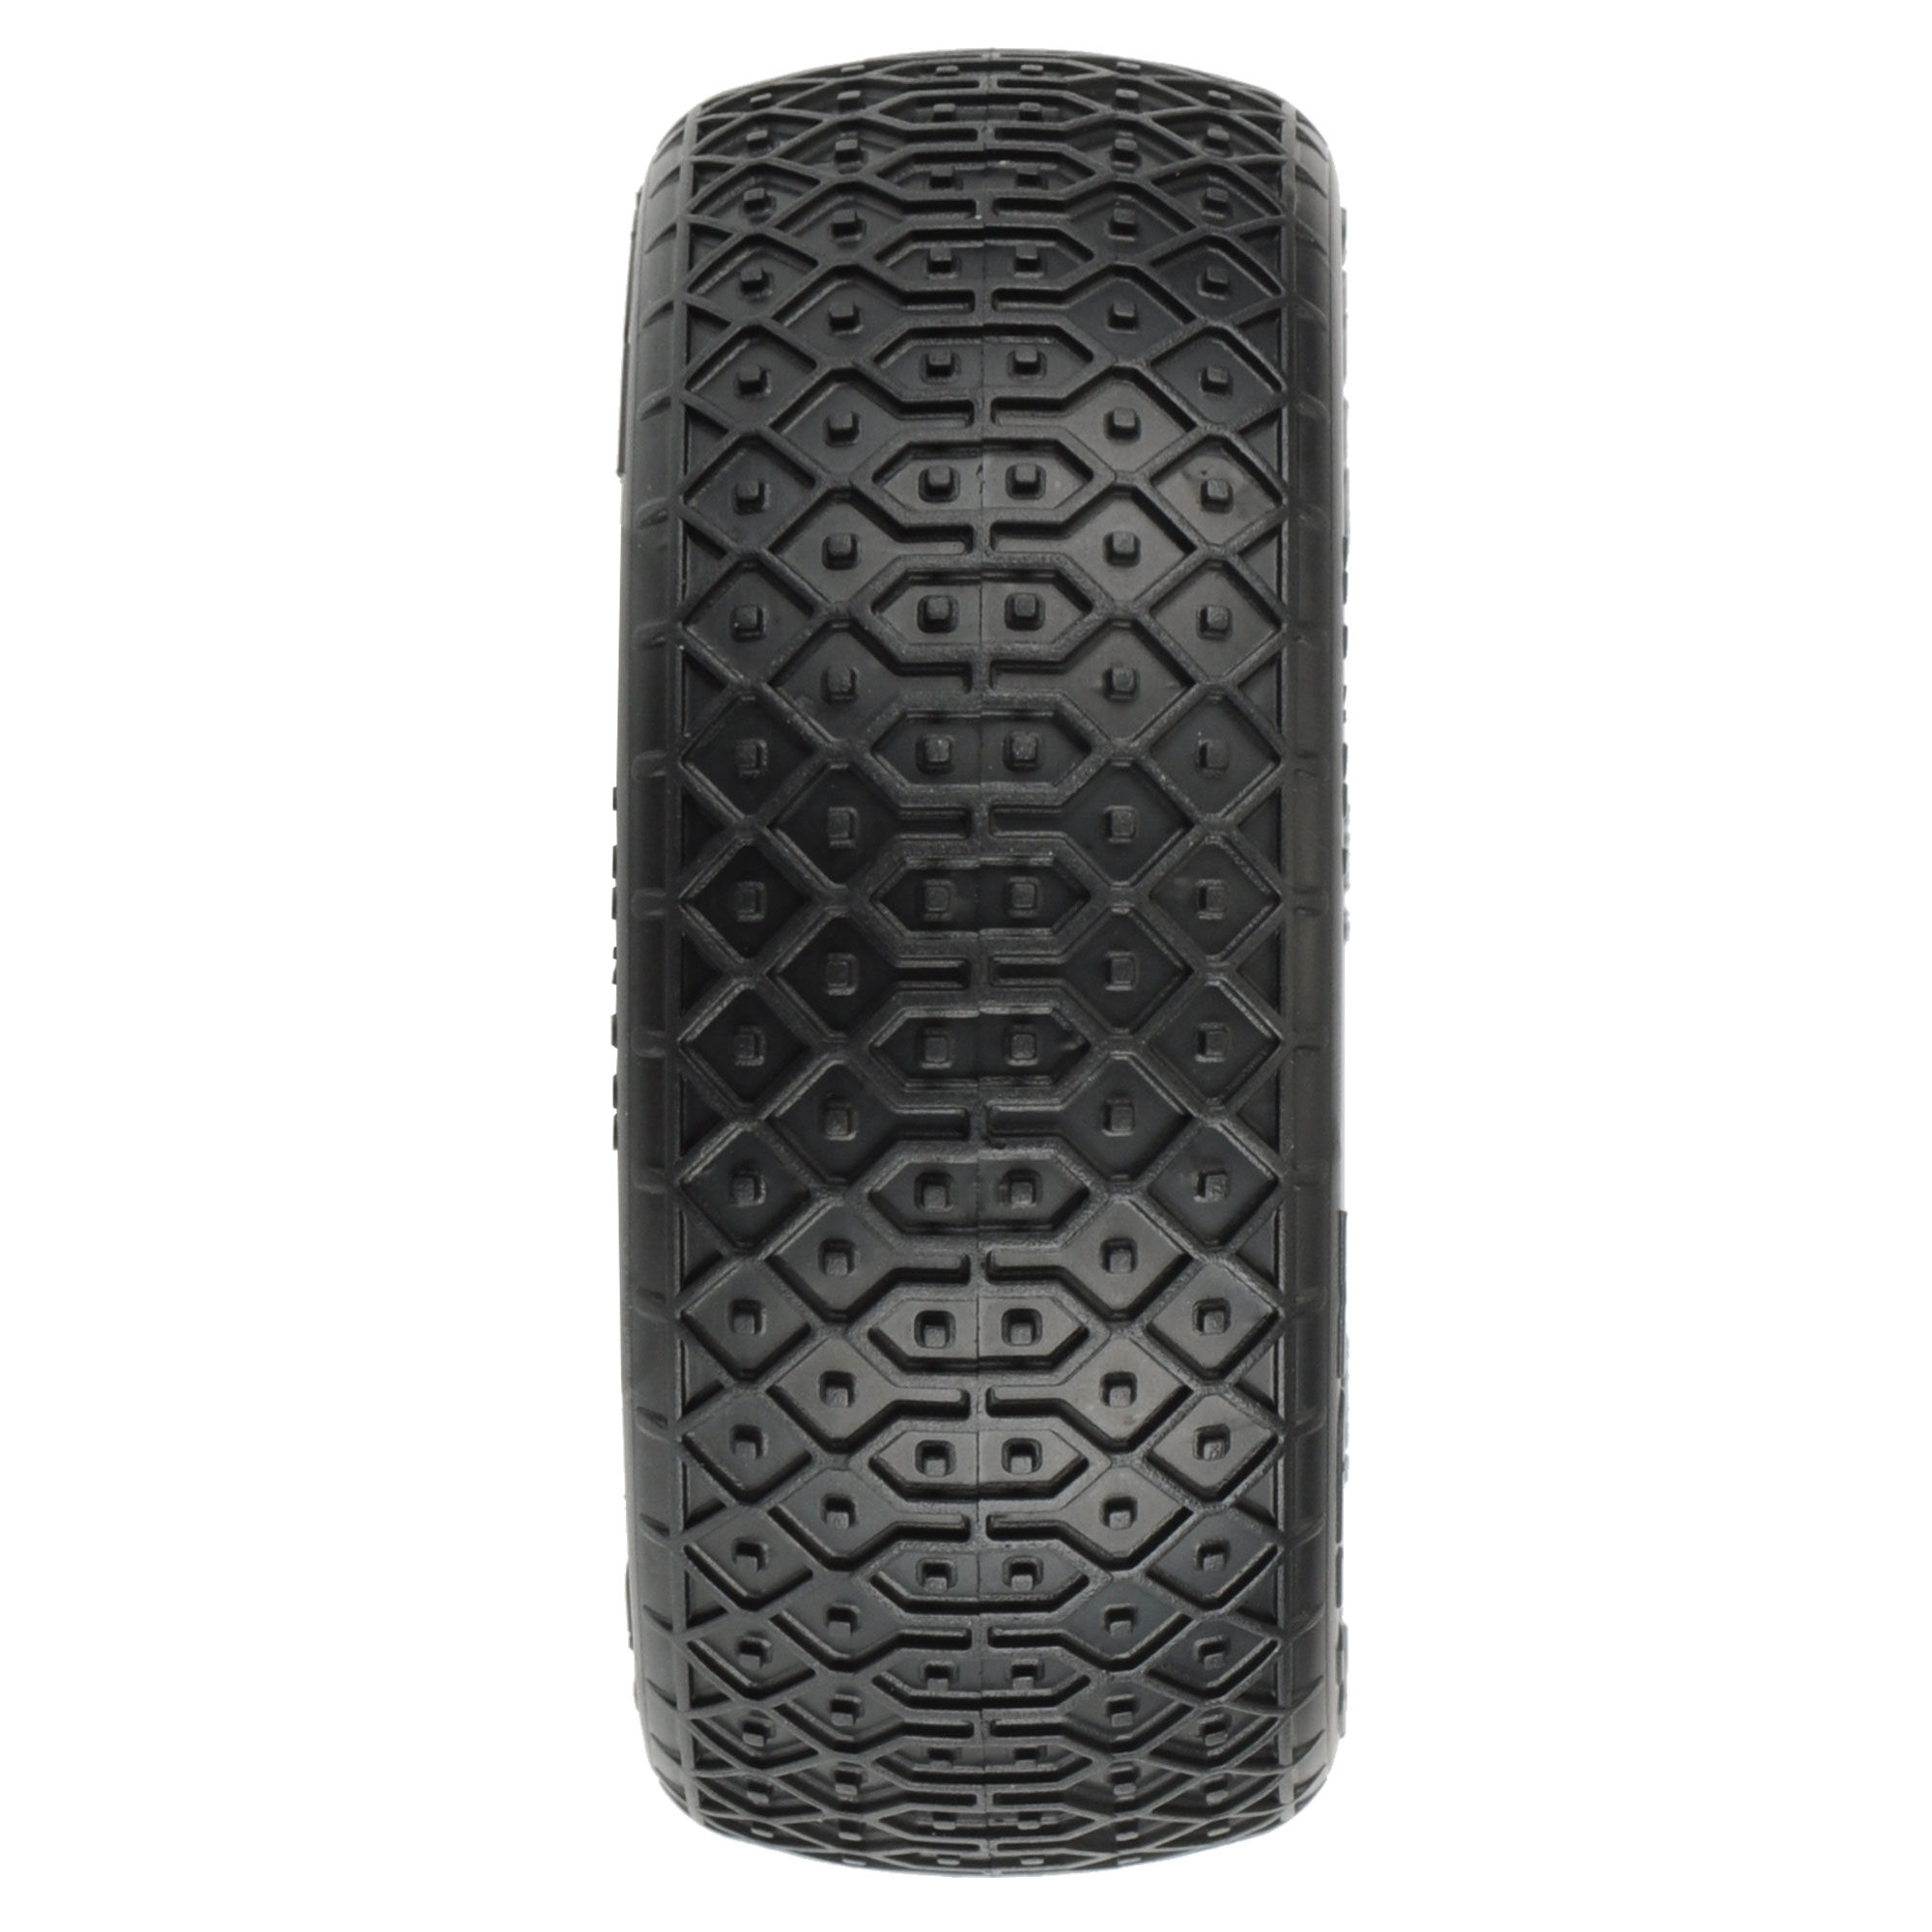 Pro-line Racing 8240-203 Electron 2.2 4wd S3 Buggy Front Tires 2 for sale online 